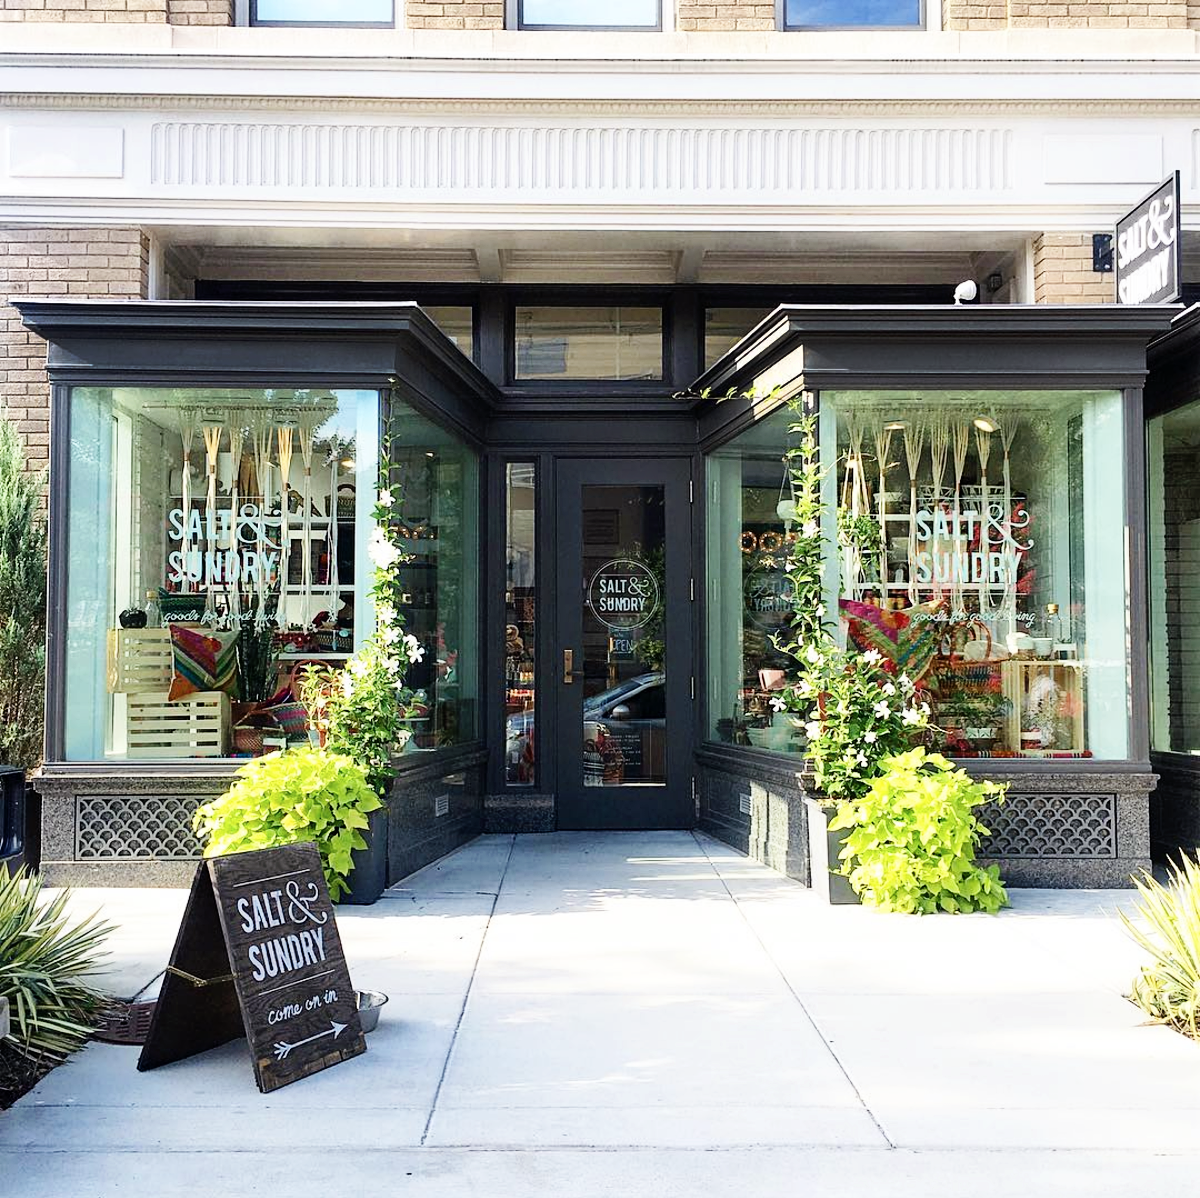 Where to Shop in Washington, DC: Salt and Sundry